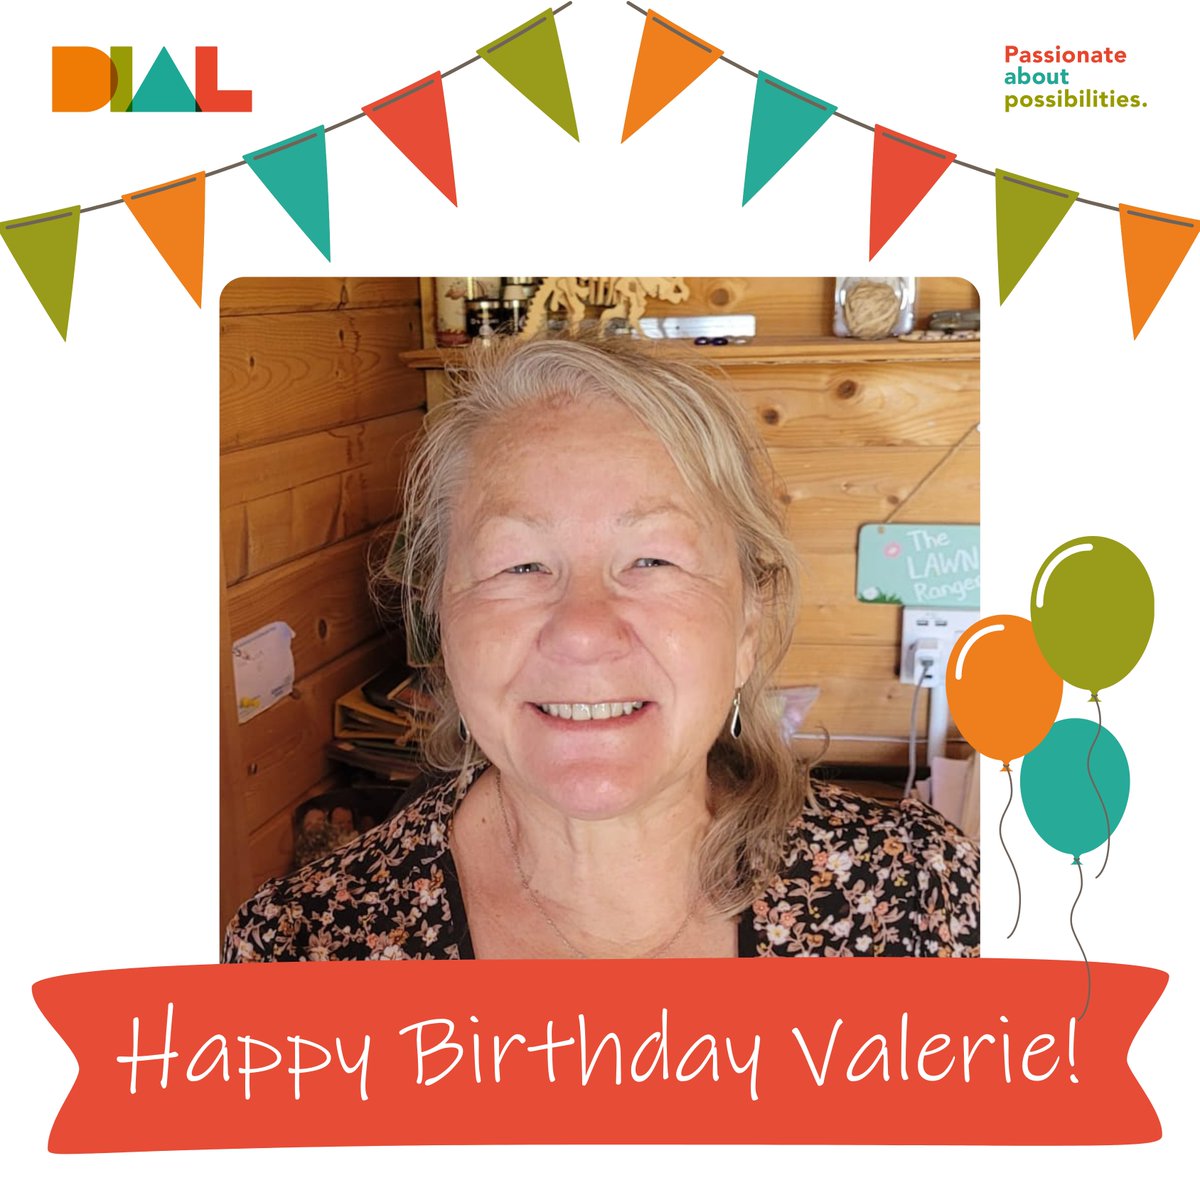 A double Happy Birthday today to our fantastic Community Development Worker, Jeff, and our fab Volunteer, Valerie! We hope that you both have a lovely day 🎈 #PassionateAboutPossibilities #HappyBirthday #TeamDIAL